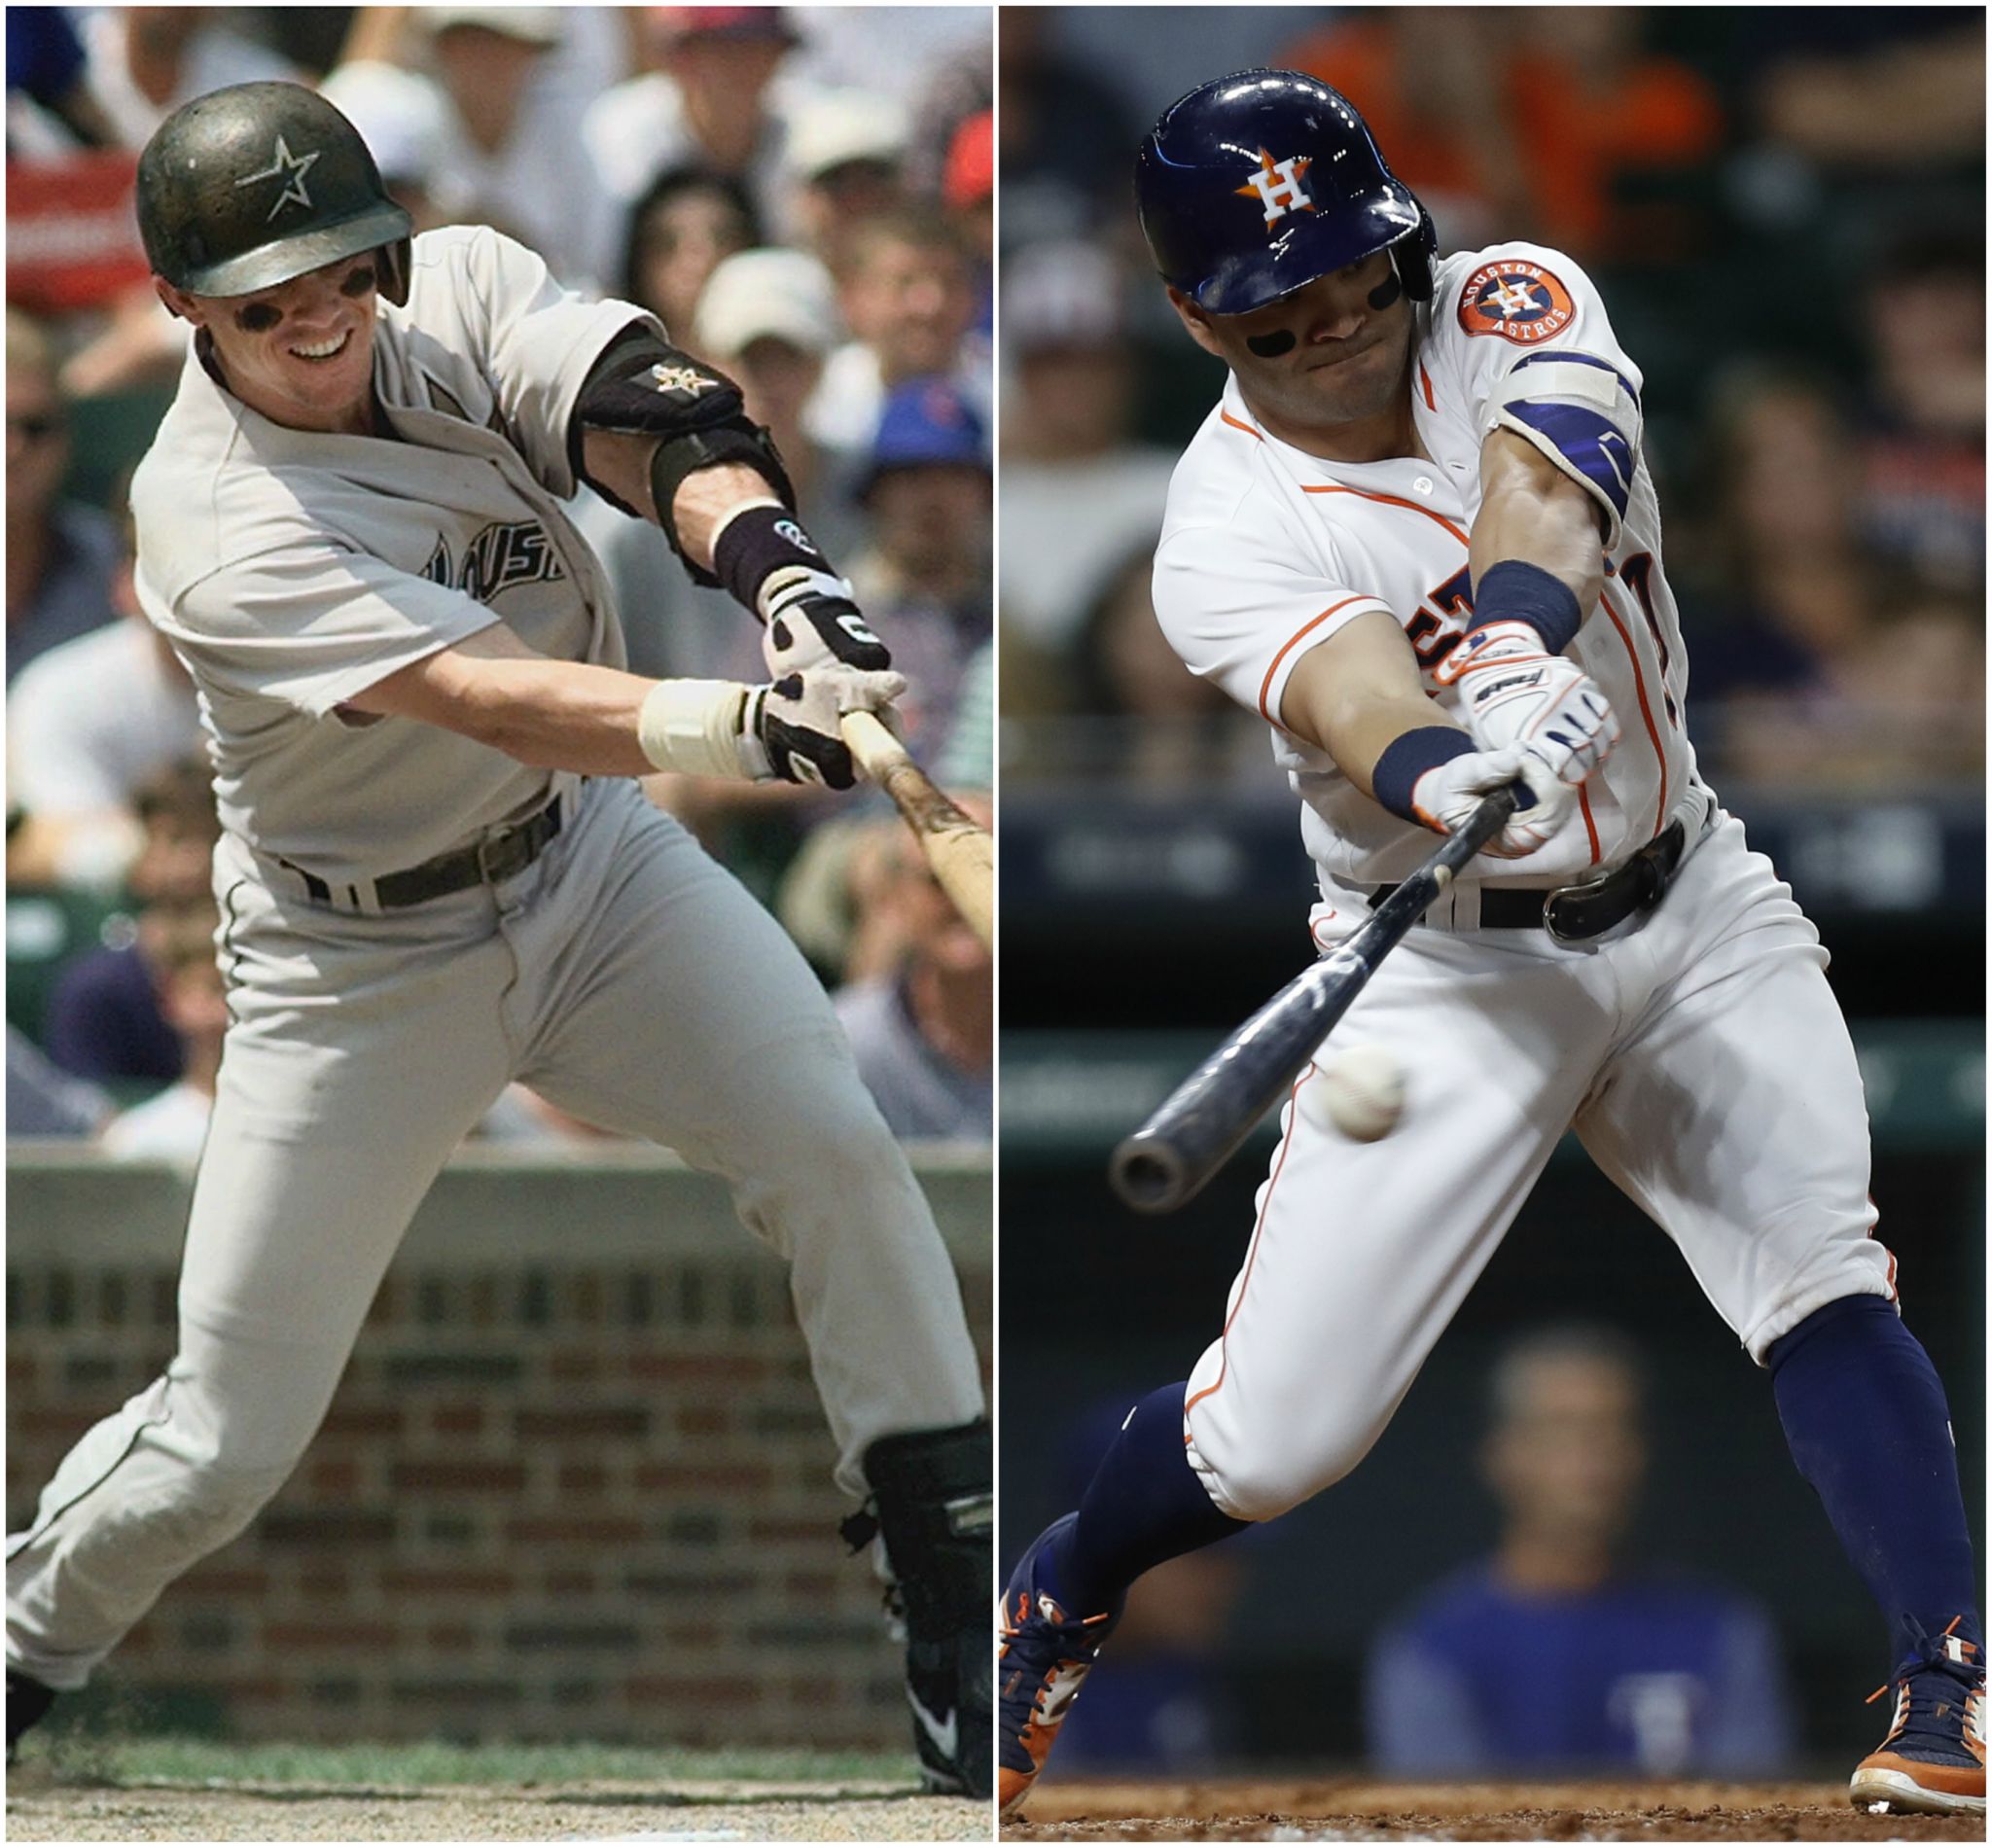 Who's better: The 1998 Astros or the current Astros?